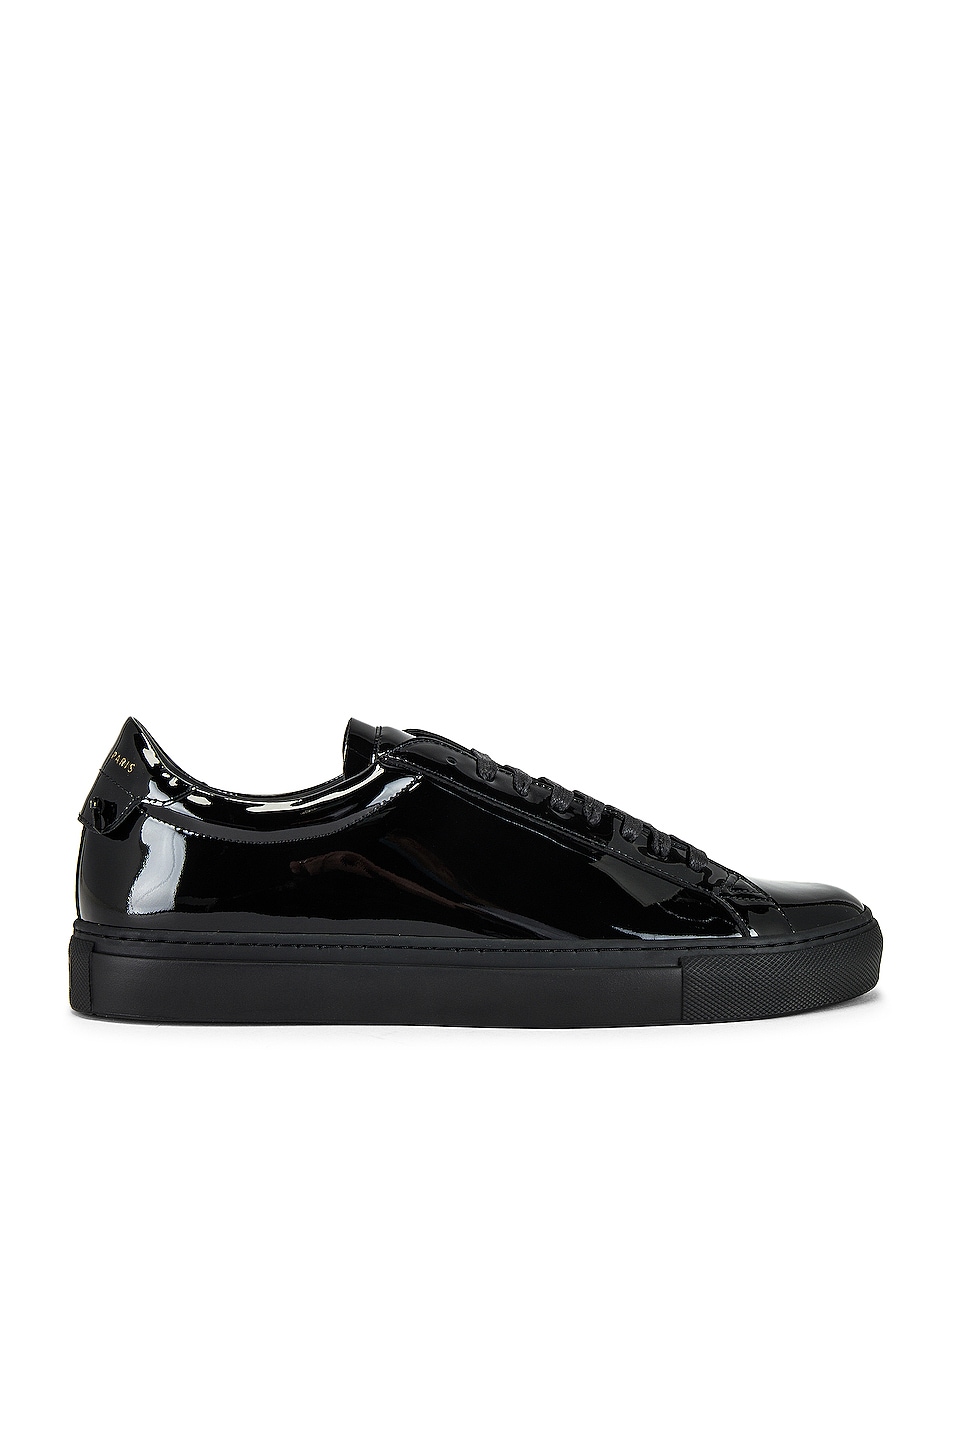 Image 1 of Givenchy Patent Leather Urban Street Sneaker in Black